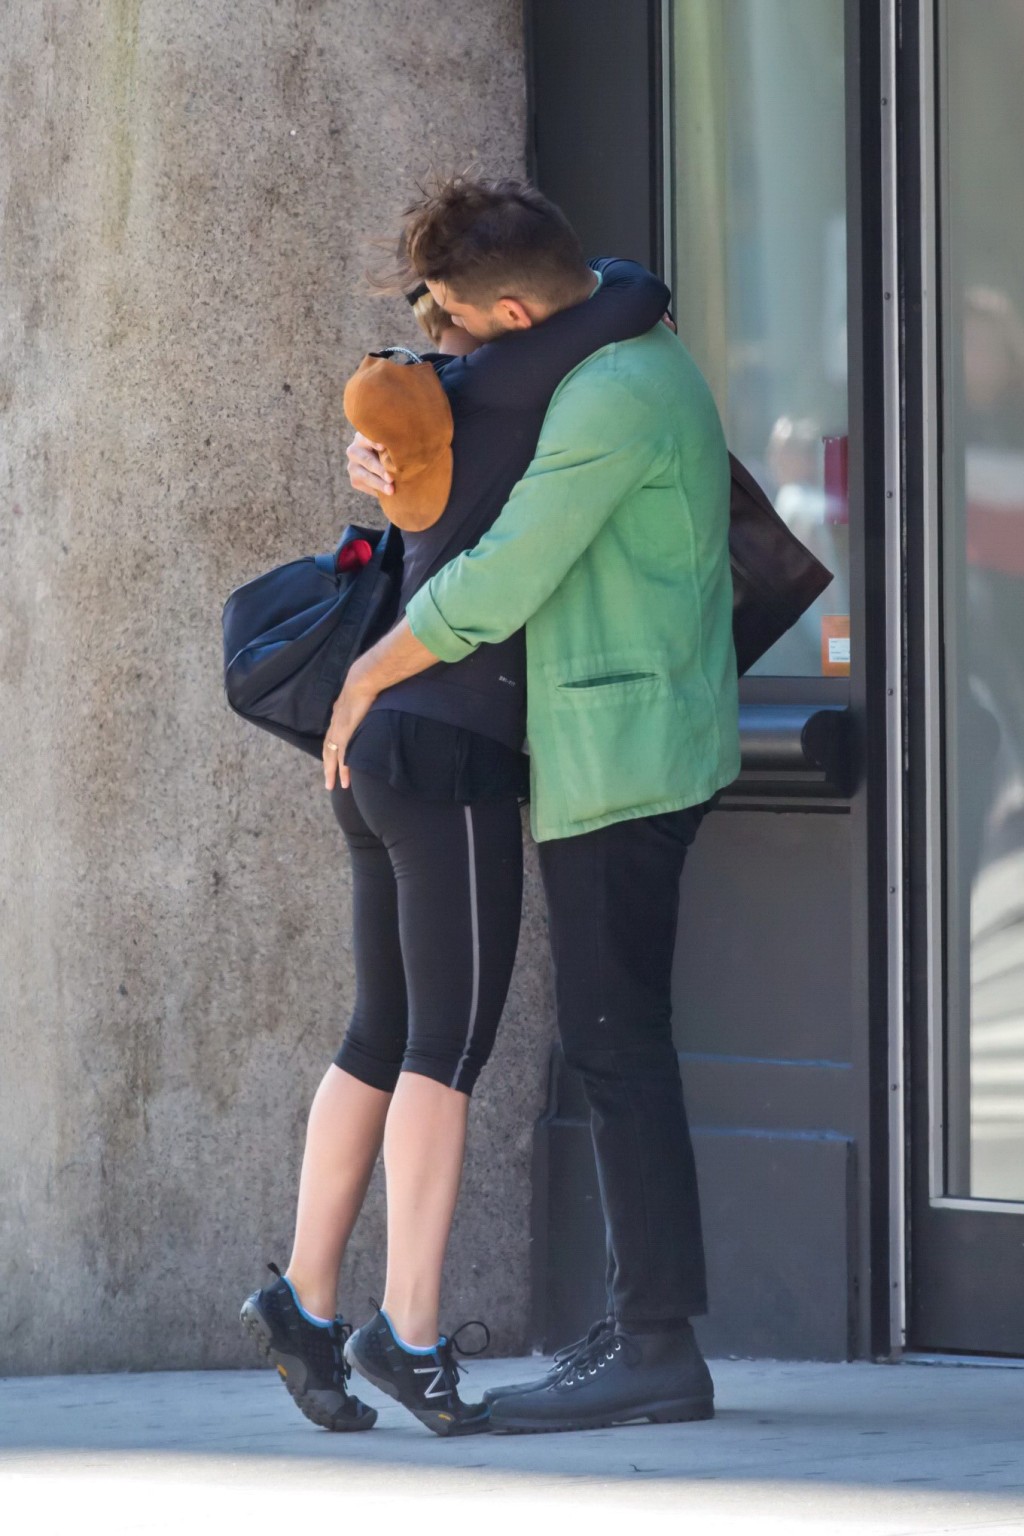 Scarlett Johansson in black leggings getting ass groped while make out in NYC #75184008